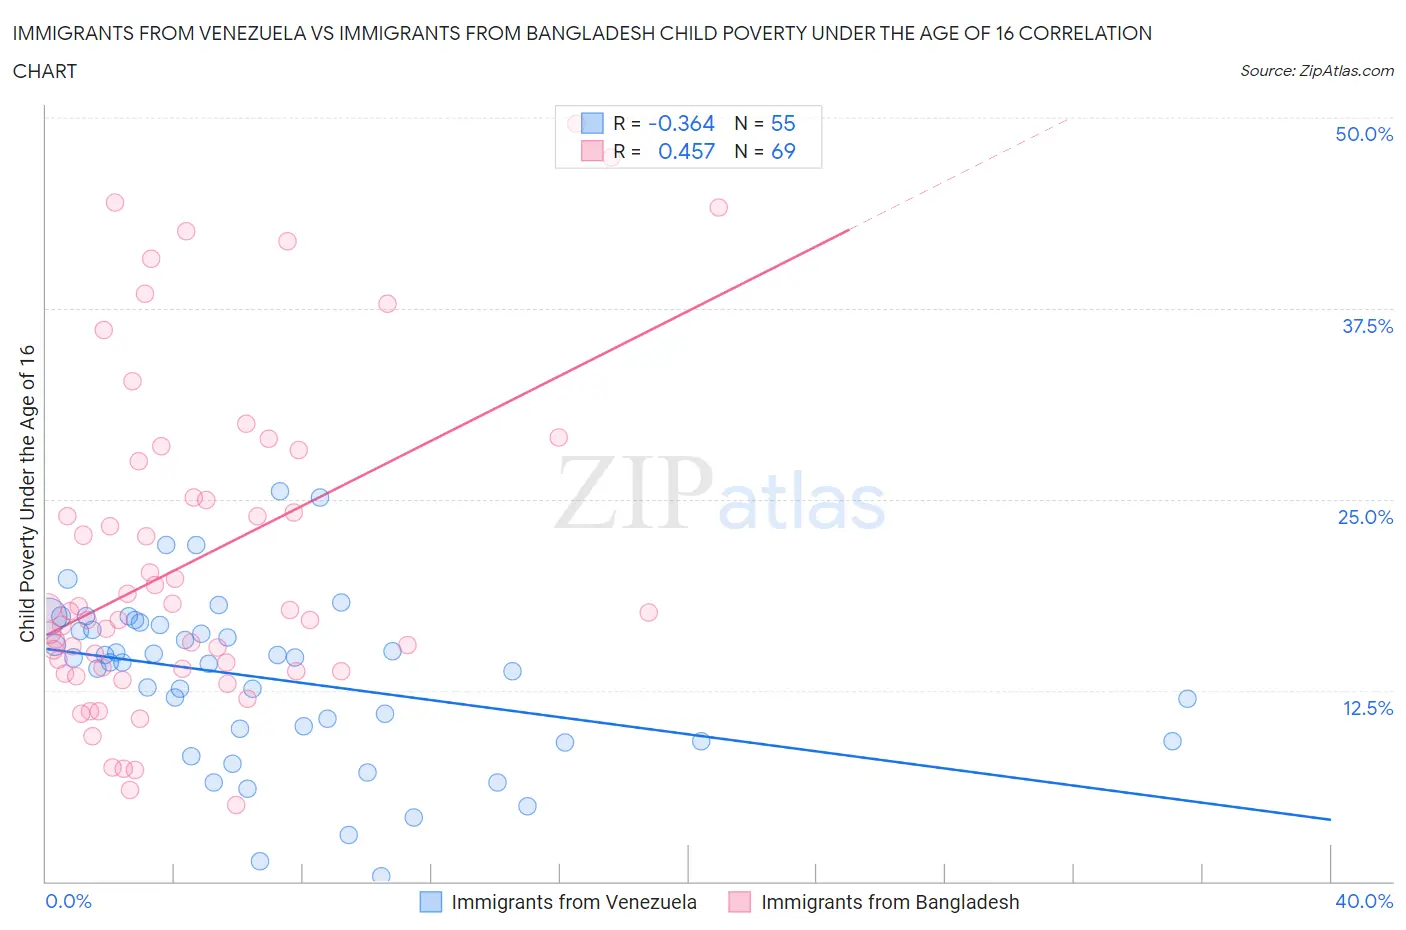 Immigrants from Venezuela vs Immigrants from Bangladesh Child Poverty Under the Age of 16